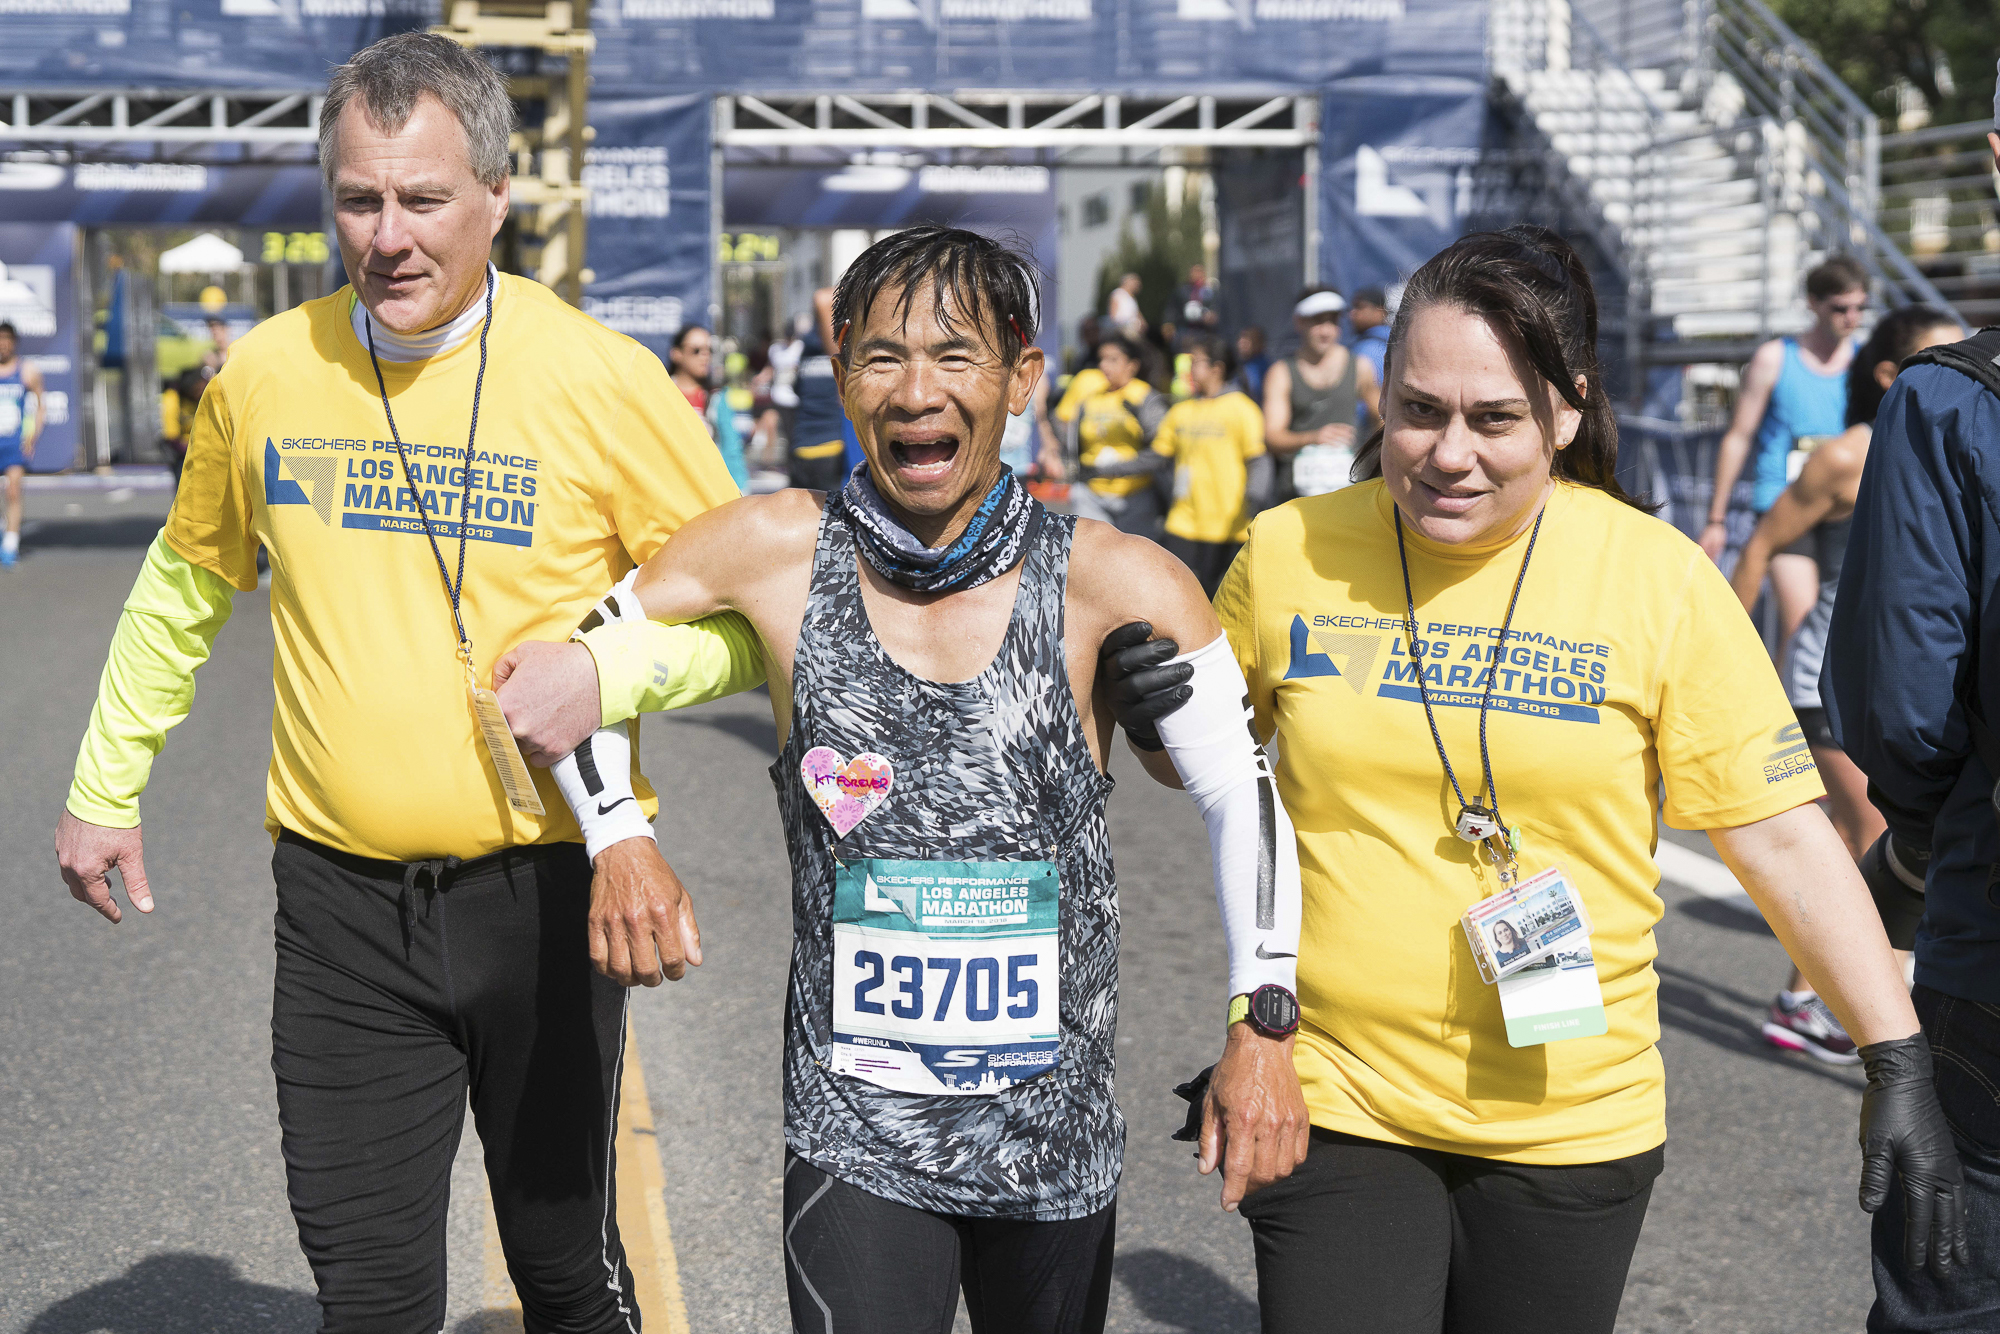  Thavee Nantarjanaporn (center) is helped at the finish line at the Los Angeles Marathon in Santa Monica, California on Sunday, March 18, 2018. Volunteers wearing yellow shirts stood ready to help runners after they completed running 26.2 miles. (Pho